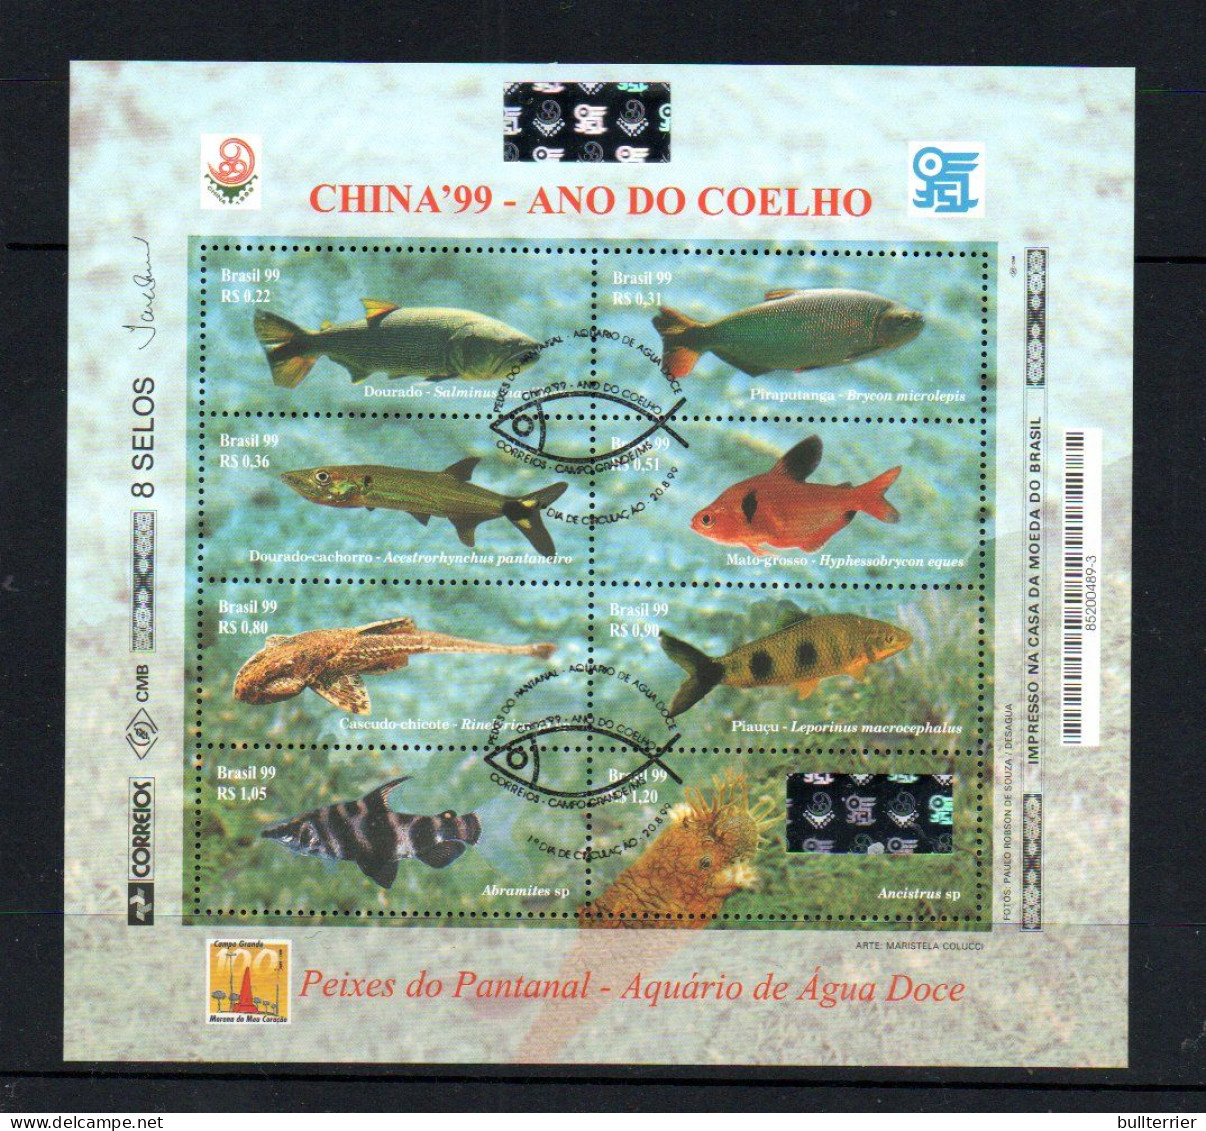 HOLOGRAMS - BRAZIL - 1999- CHINA EXPO FISHES SHEETLET OF 8 FINE USED - Hologrammes